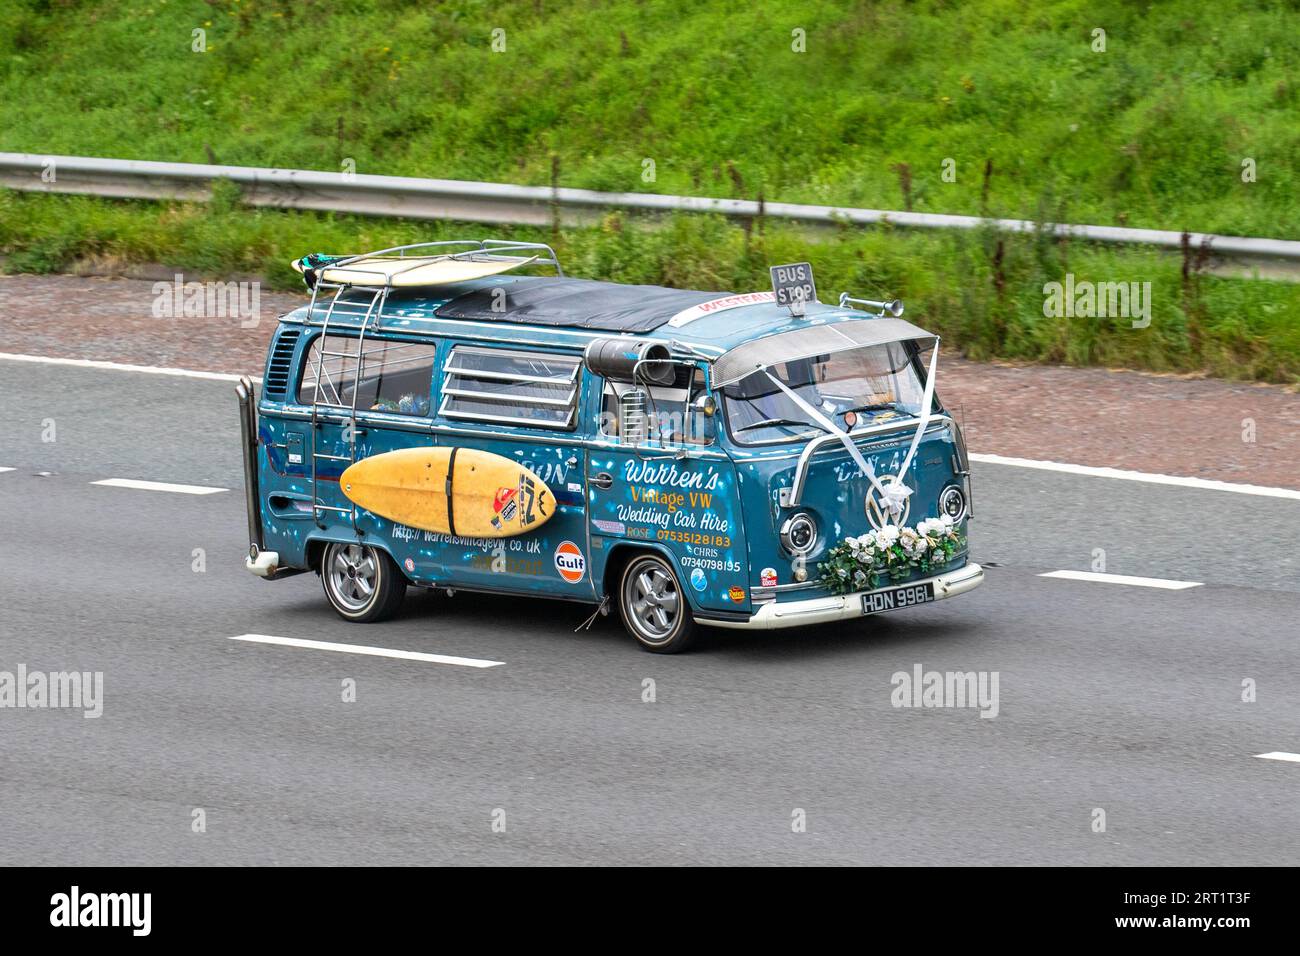 Warren's Vintage VW. 1973 70s seventies Blue Custom Volkswagen Motor Caravan LCV Petrol 1584 cc. Bay Window Westfalia Camper Van a curious wedding hire car with hippie decorations, white ribbons & surfboard; travelling at speed on the M6 motorway in Greater Manchester, UK Stock Photo